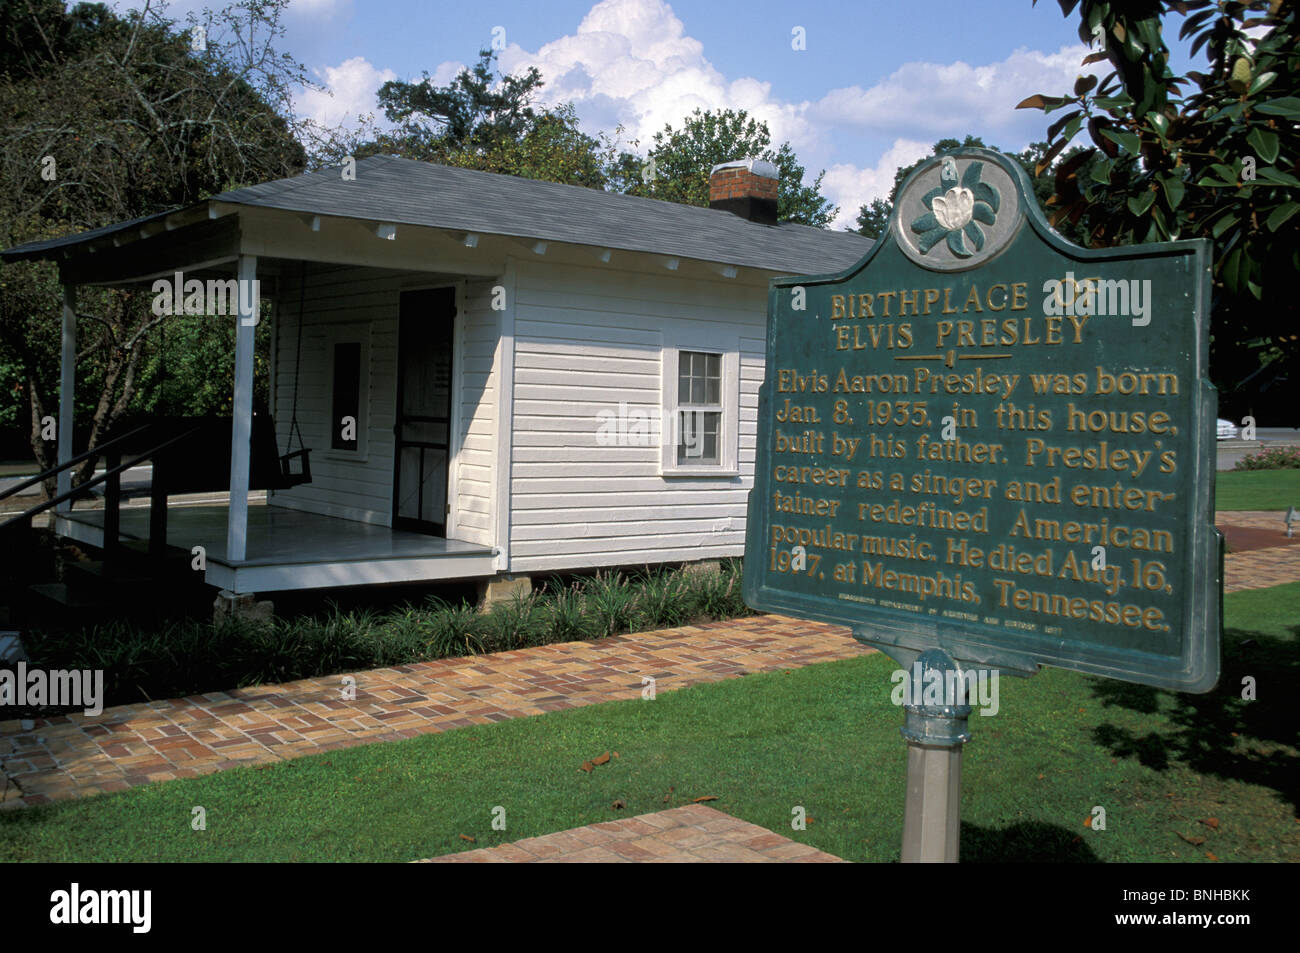 Usa Tupelo Mississippi Elvis Presley Birthplace Birth House Sign Information Music Culture United States of America Stock Photo